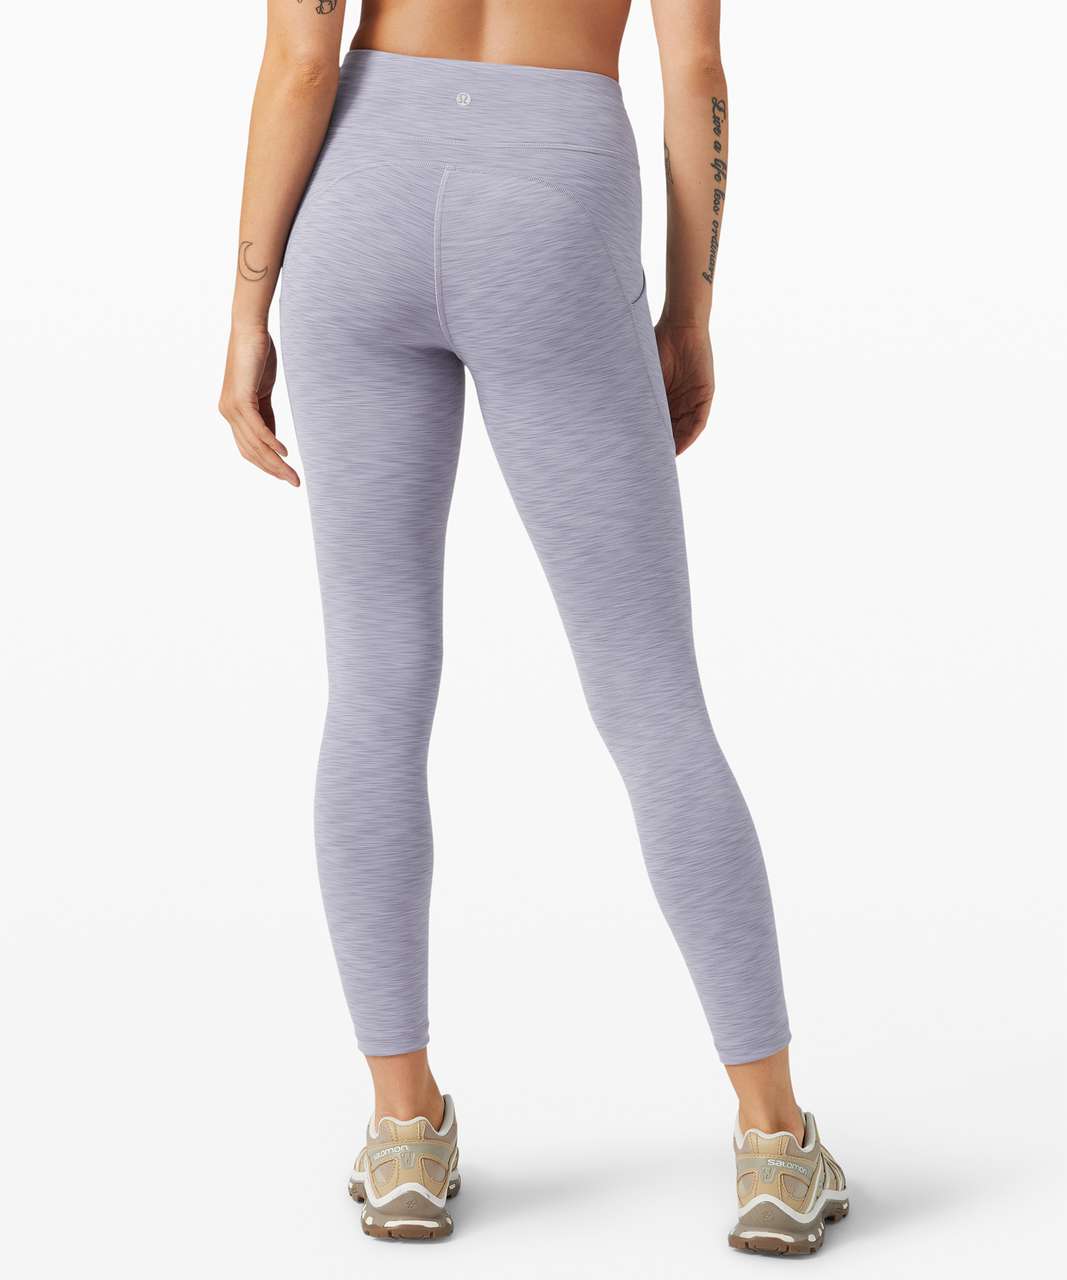 Got my heathered grey invigorate leggings in the mail today. Scored